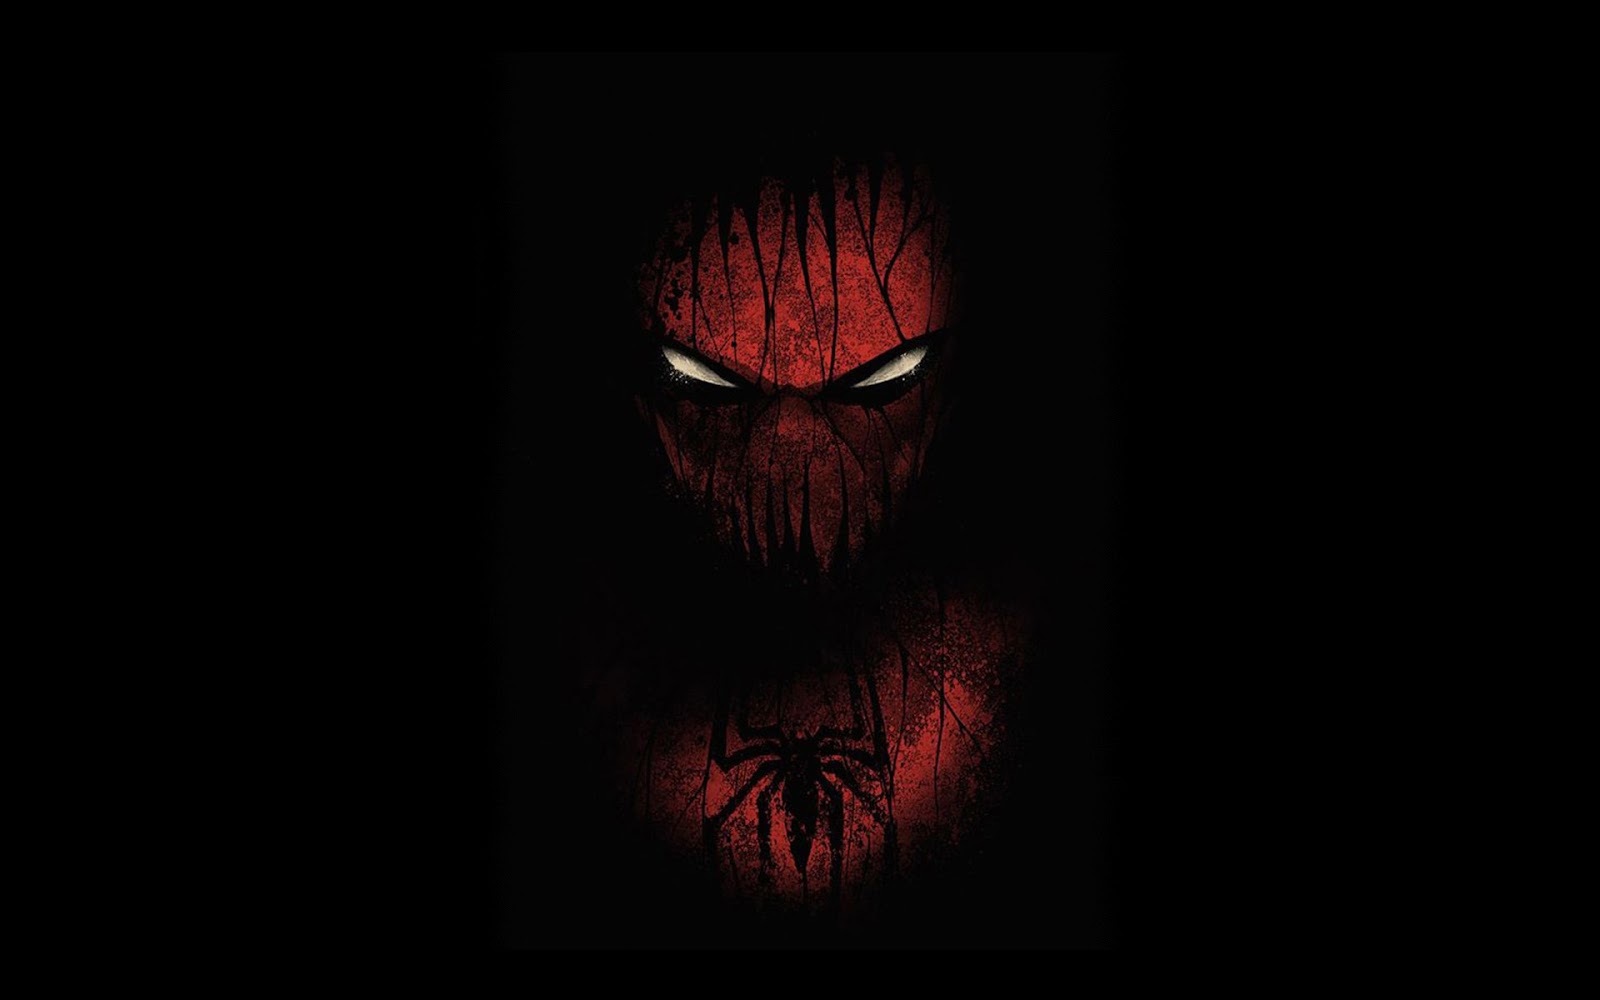 Cool Amazing Spider Man A188 Ivy Wallpaper